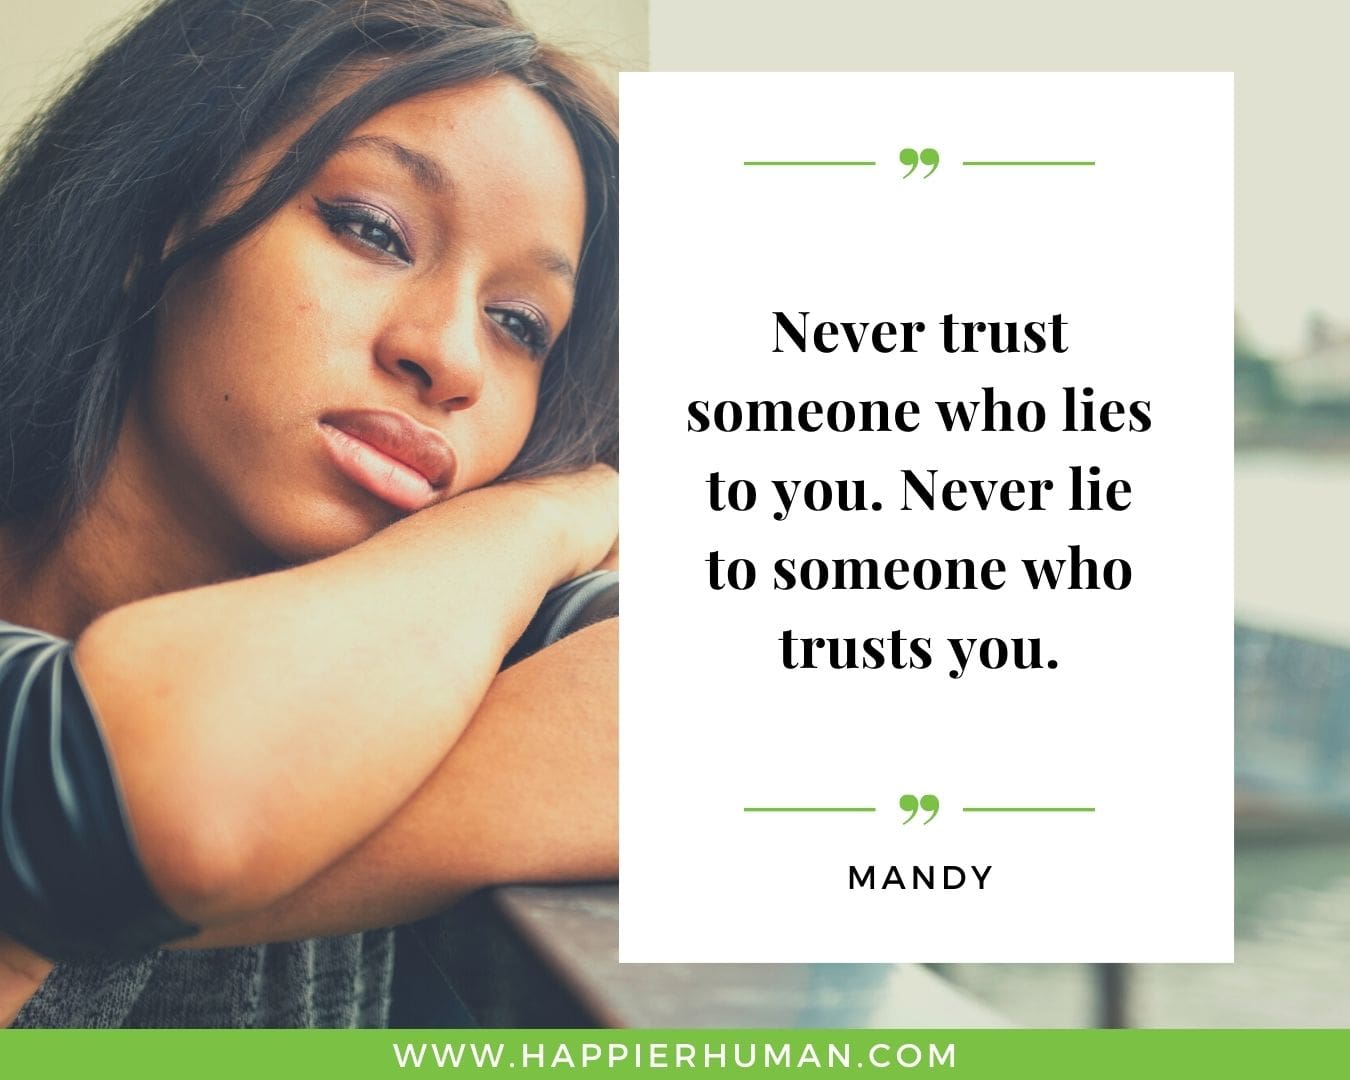 Broken Trust Quotes - “Never trust someone who lies to you. Never lie to someone who trusts you.” - Mandy